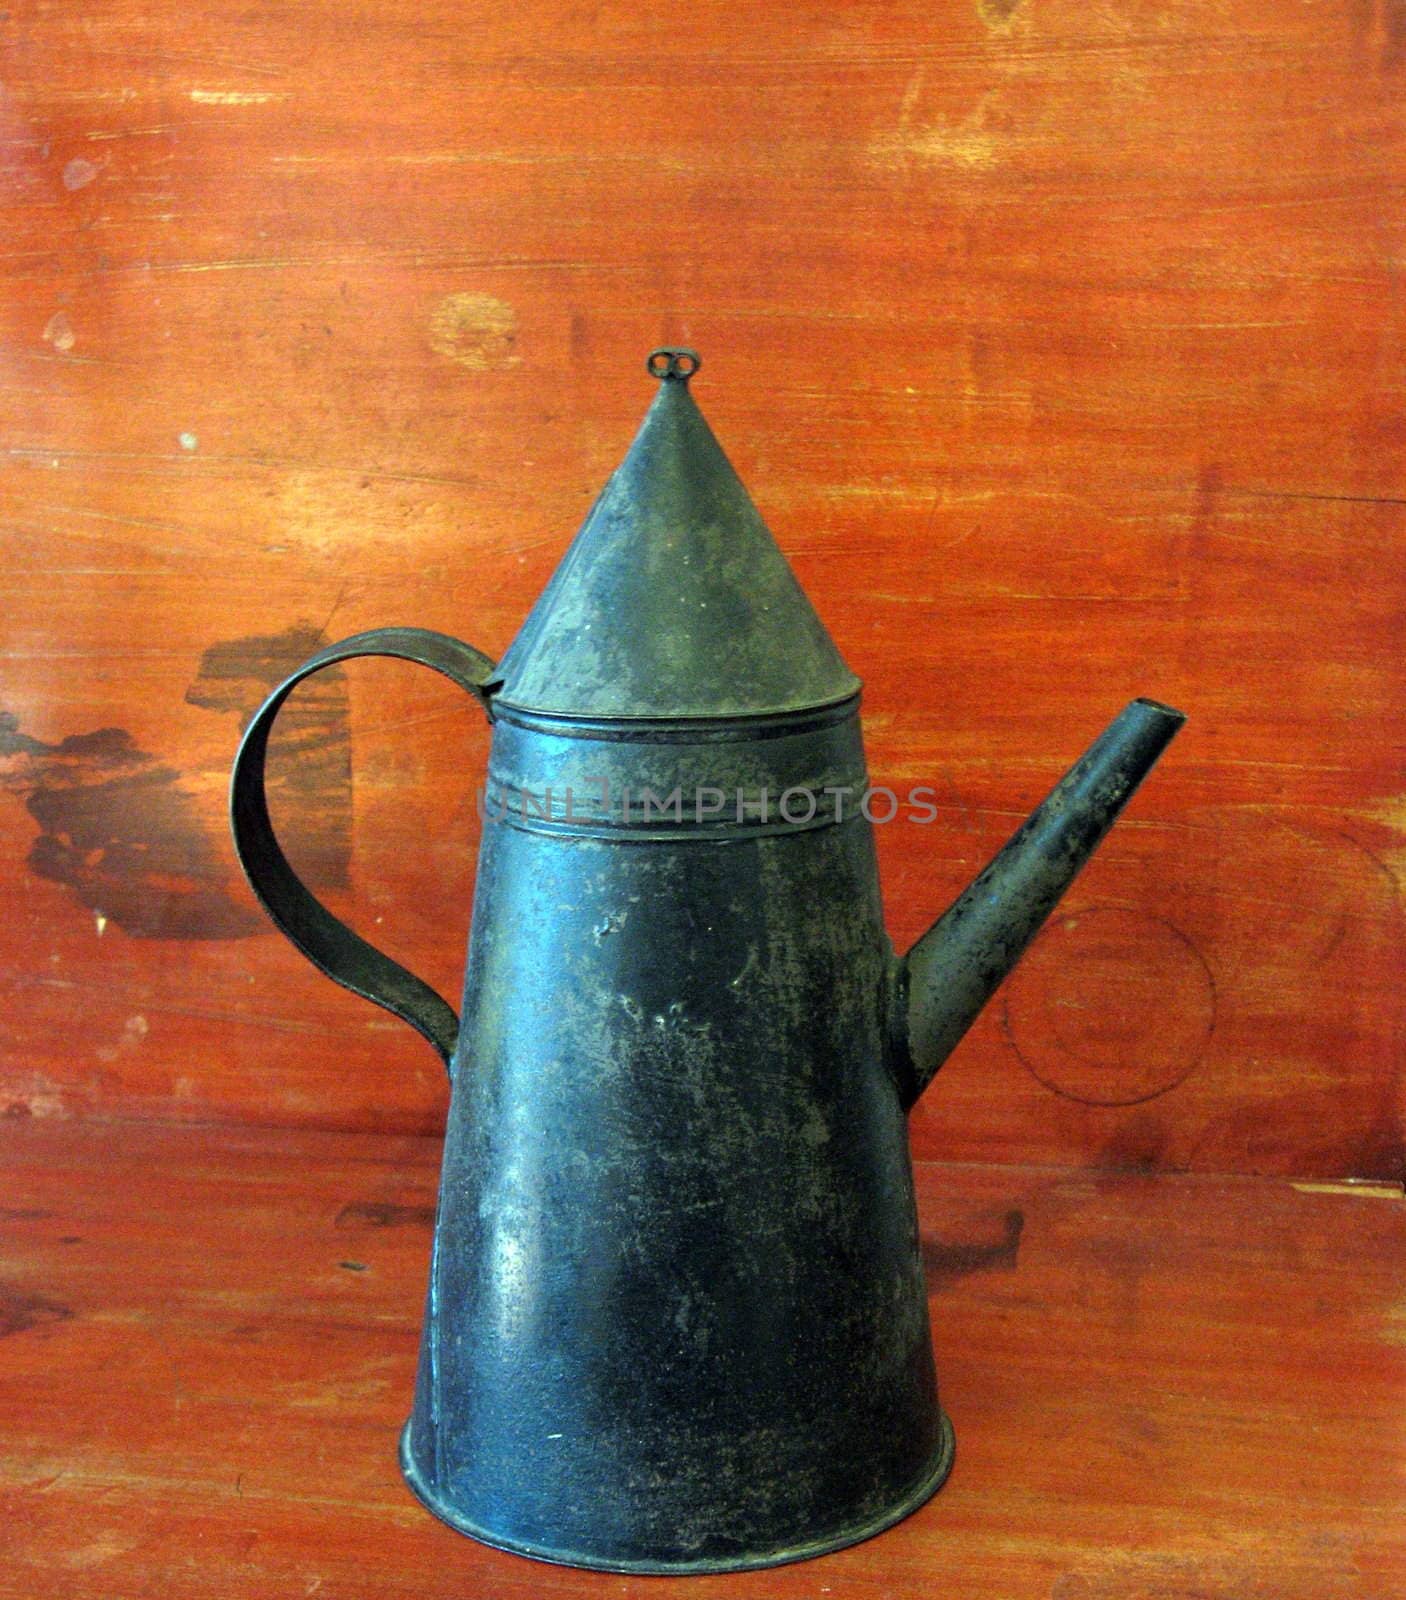 Antique tole coffee pot, sitting on a 19th century painted table